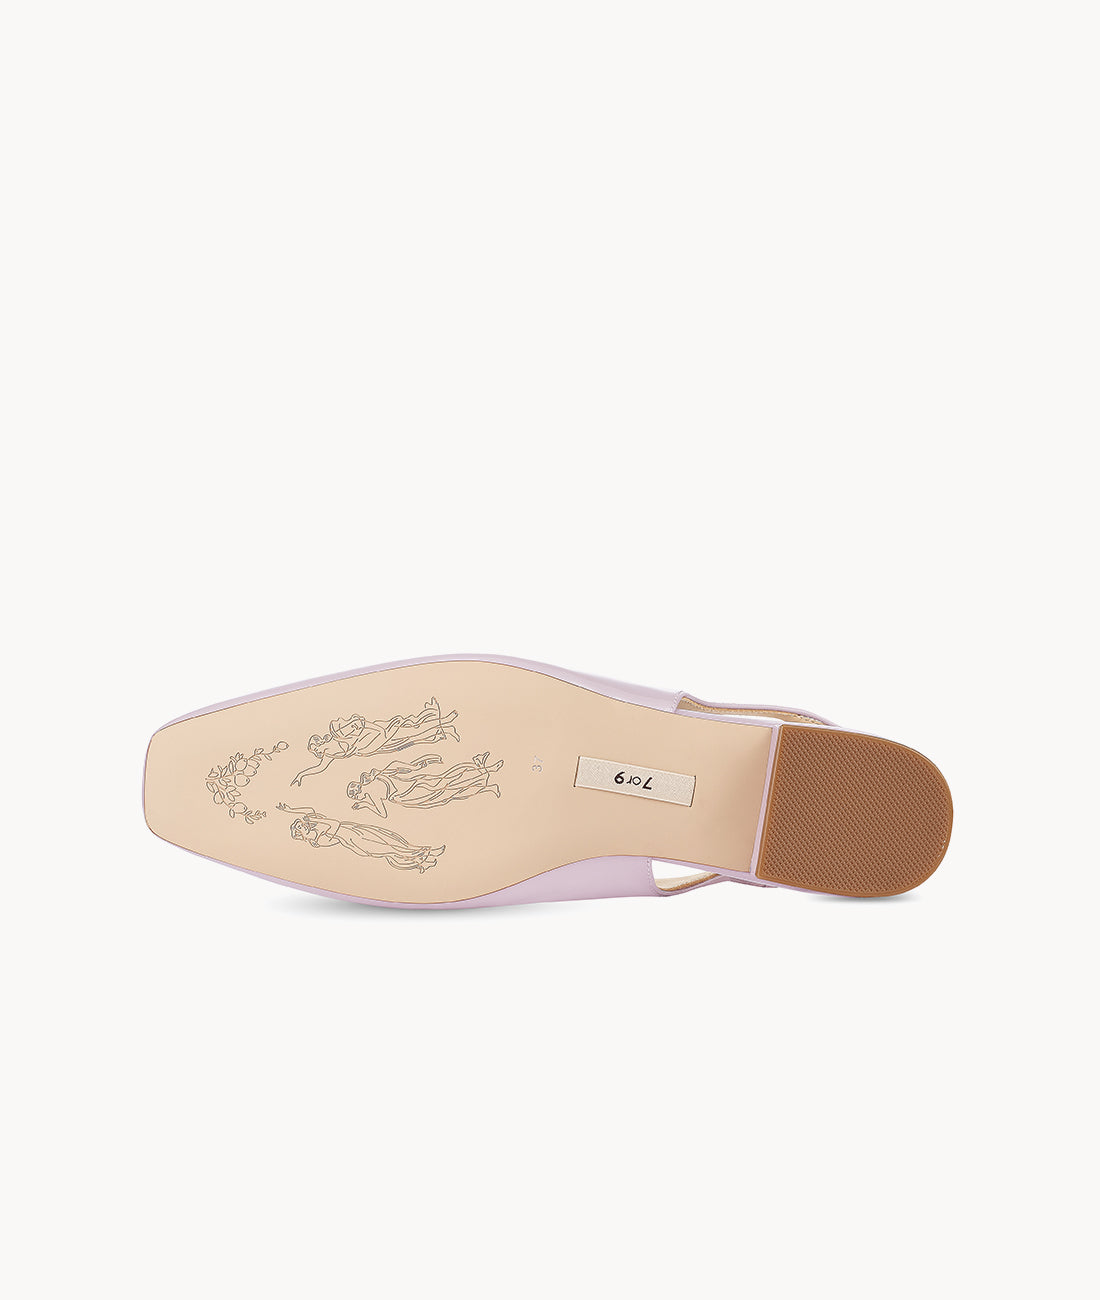 Bauhinia Mary Jane-Square-toe pink Slingback Flat with 25mm heel